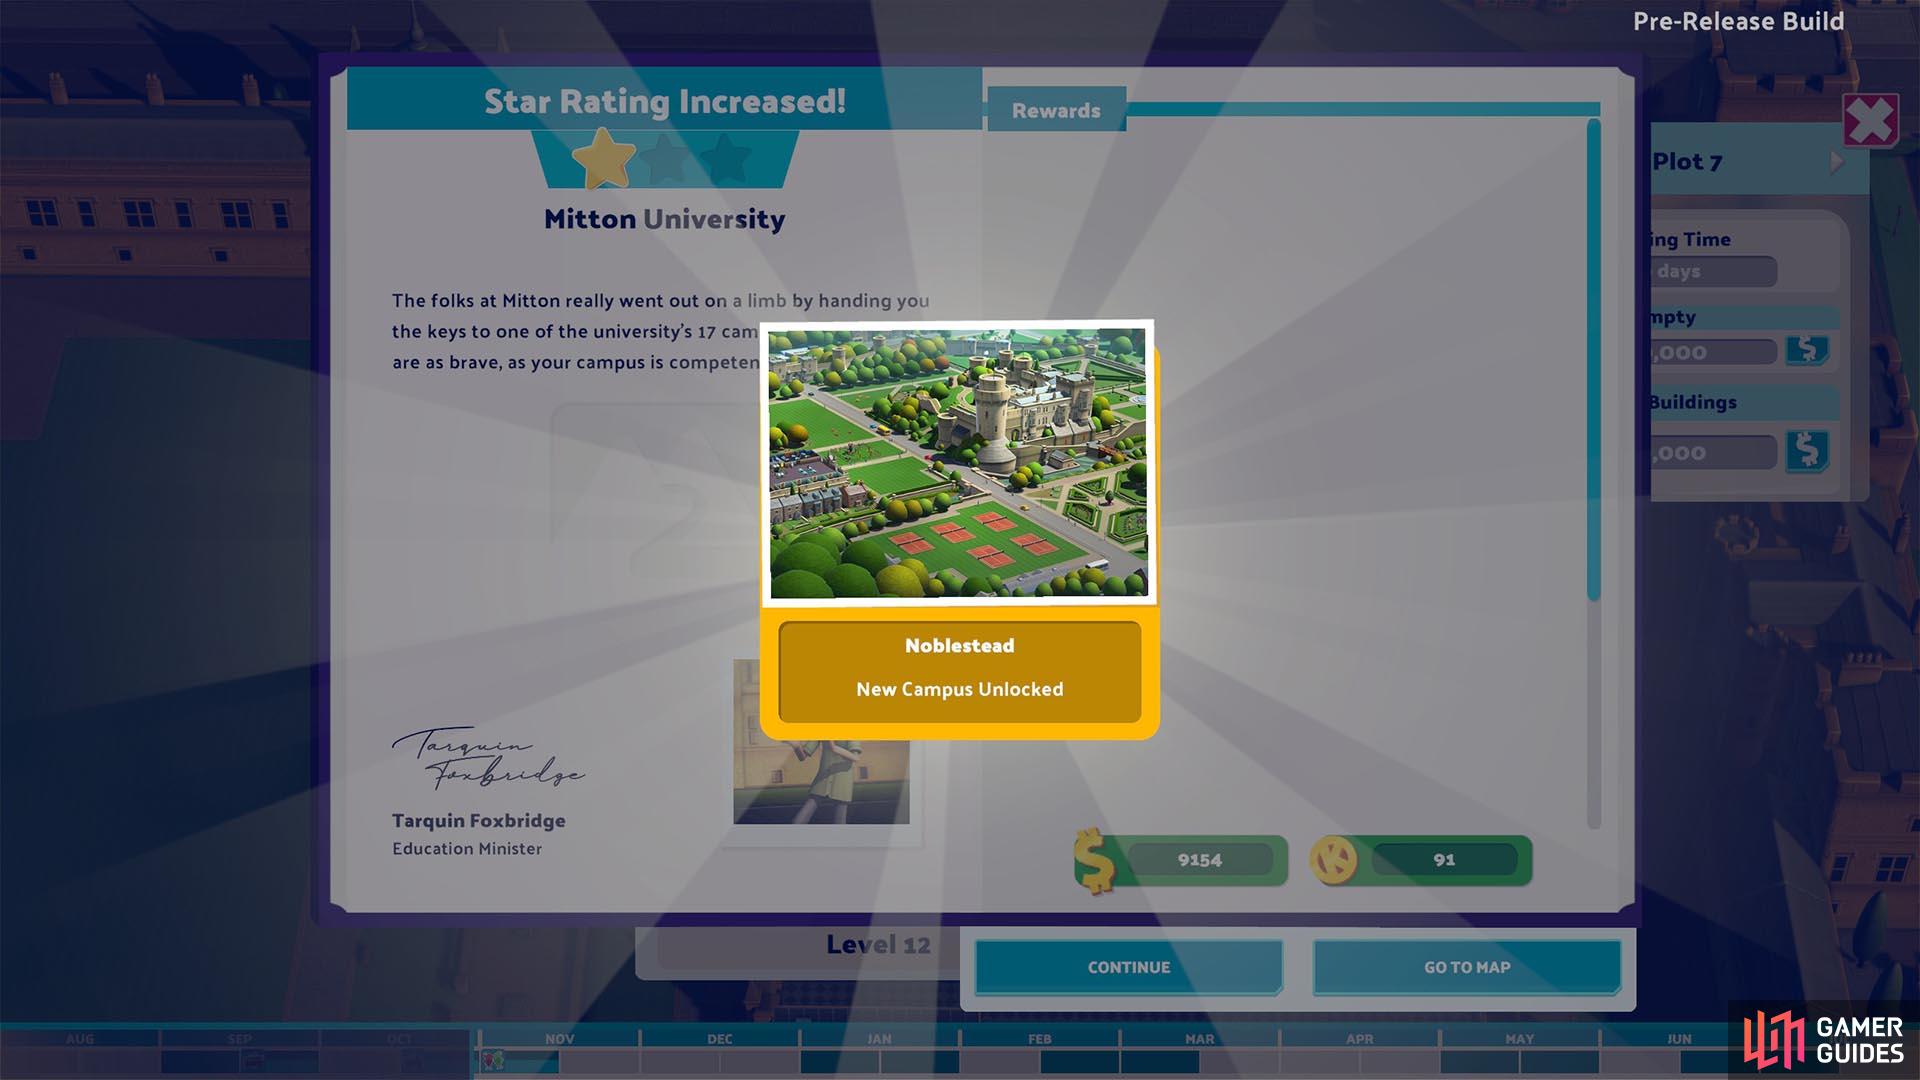 Improving the rating of your campus unlocks lots of cool new things - like more campuses!